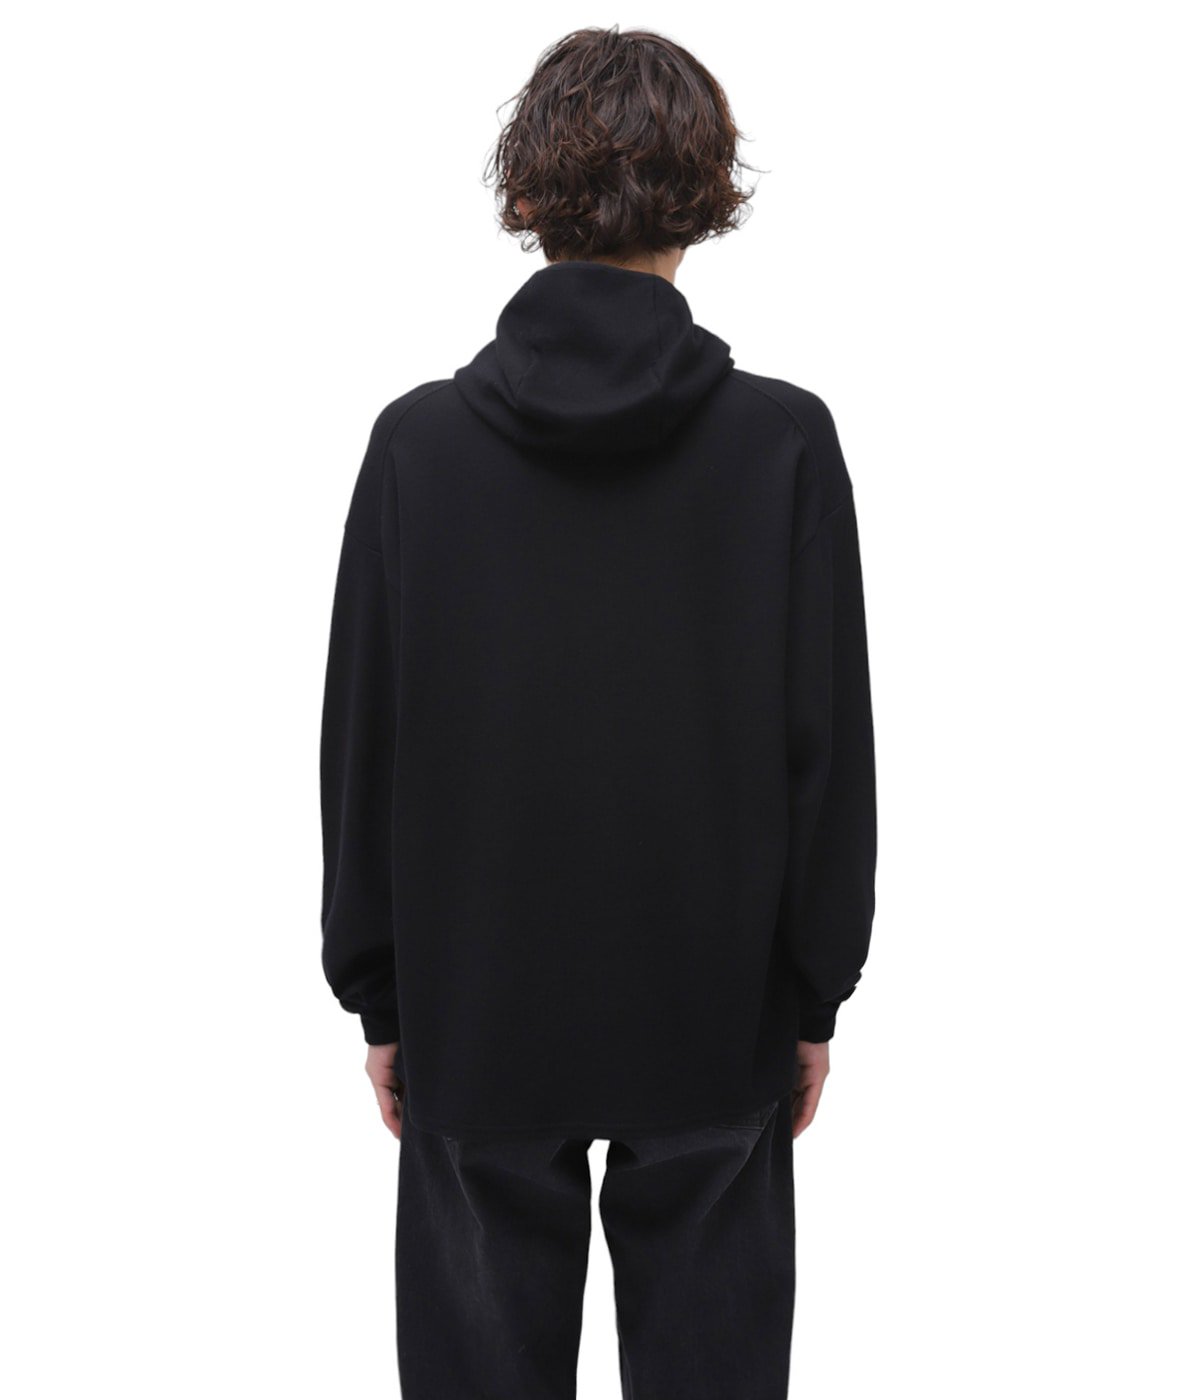 HOODIE - super140's wool knit - | marka(マーカ) / トップス